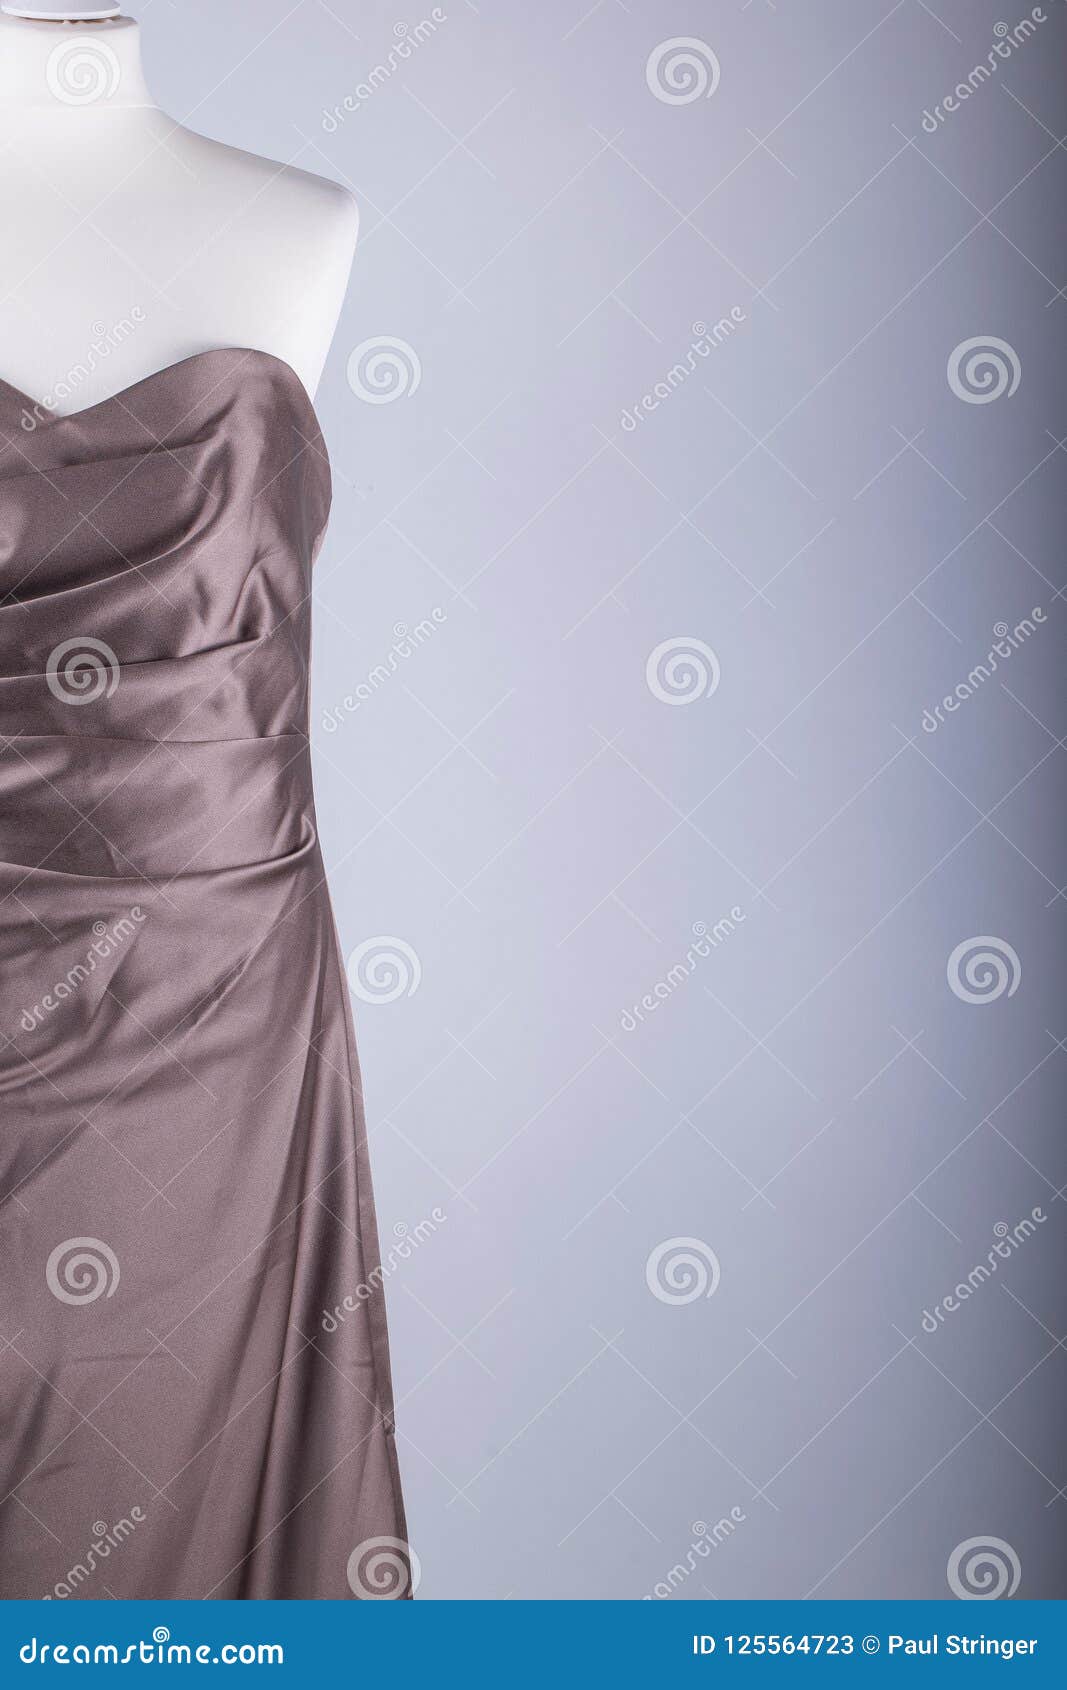 Tailors Mannequin Dressed in a Long Gold Satin Dress Stock Image ...